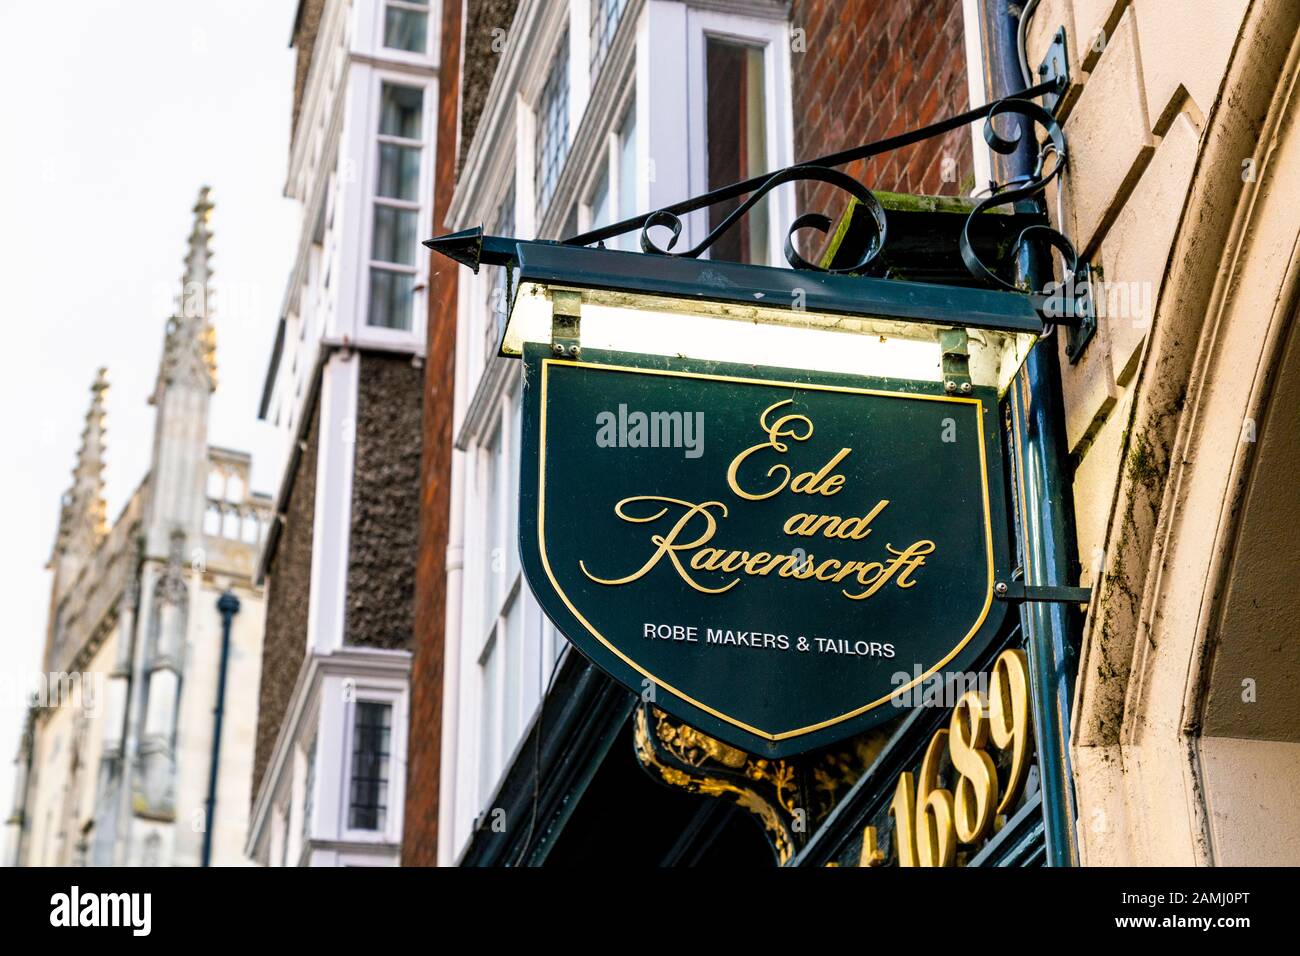 Ede and Ravenscroft Robe Makers and Tailors shop in Cambridge, UK Stock Photo